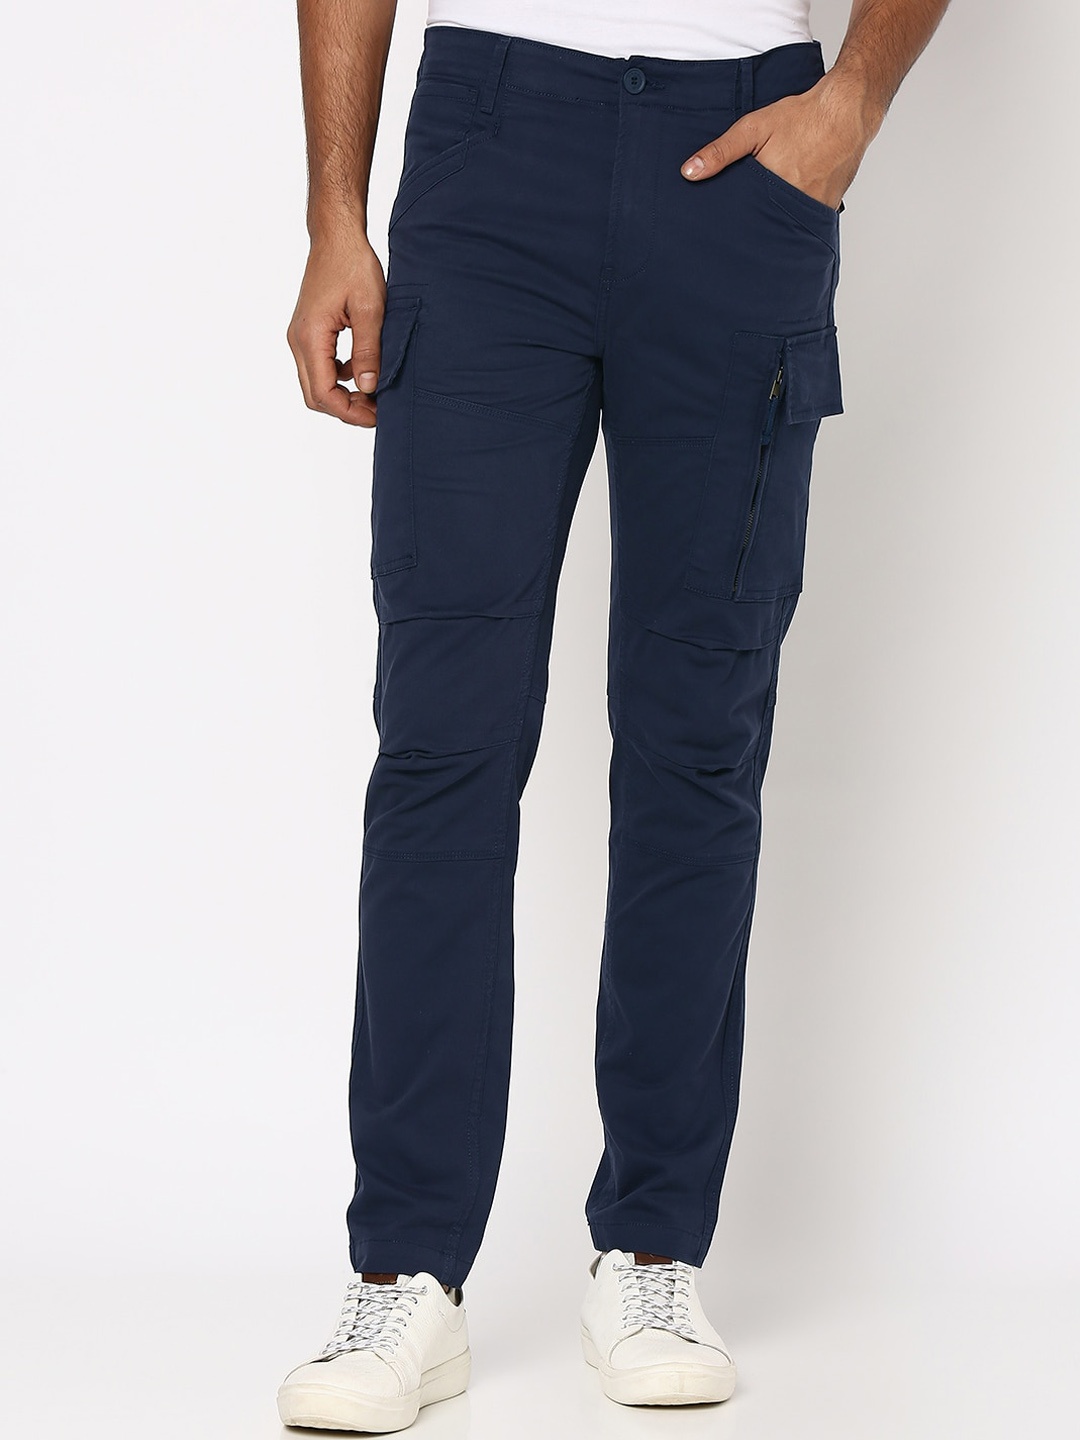 

Mufti Men Skinny Fit Cargos Trousers, Navy blue